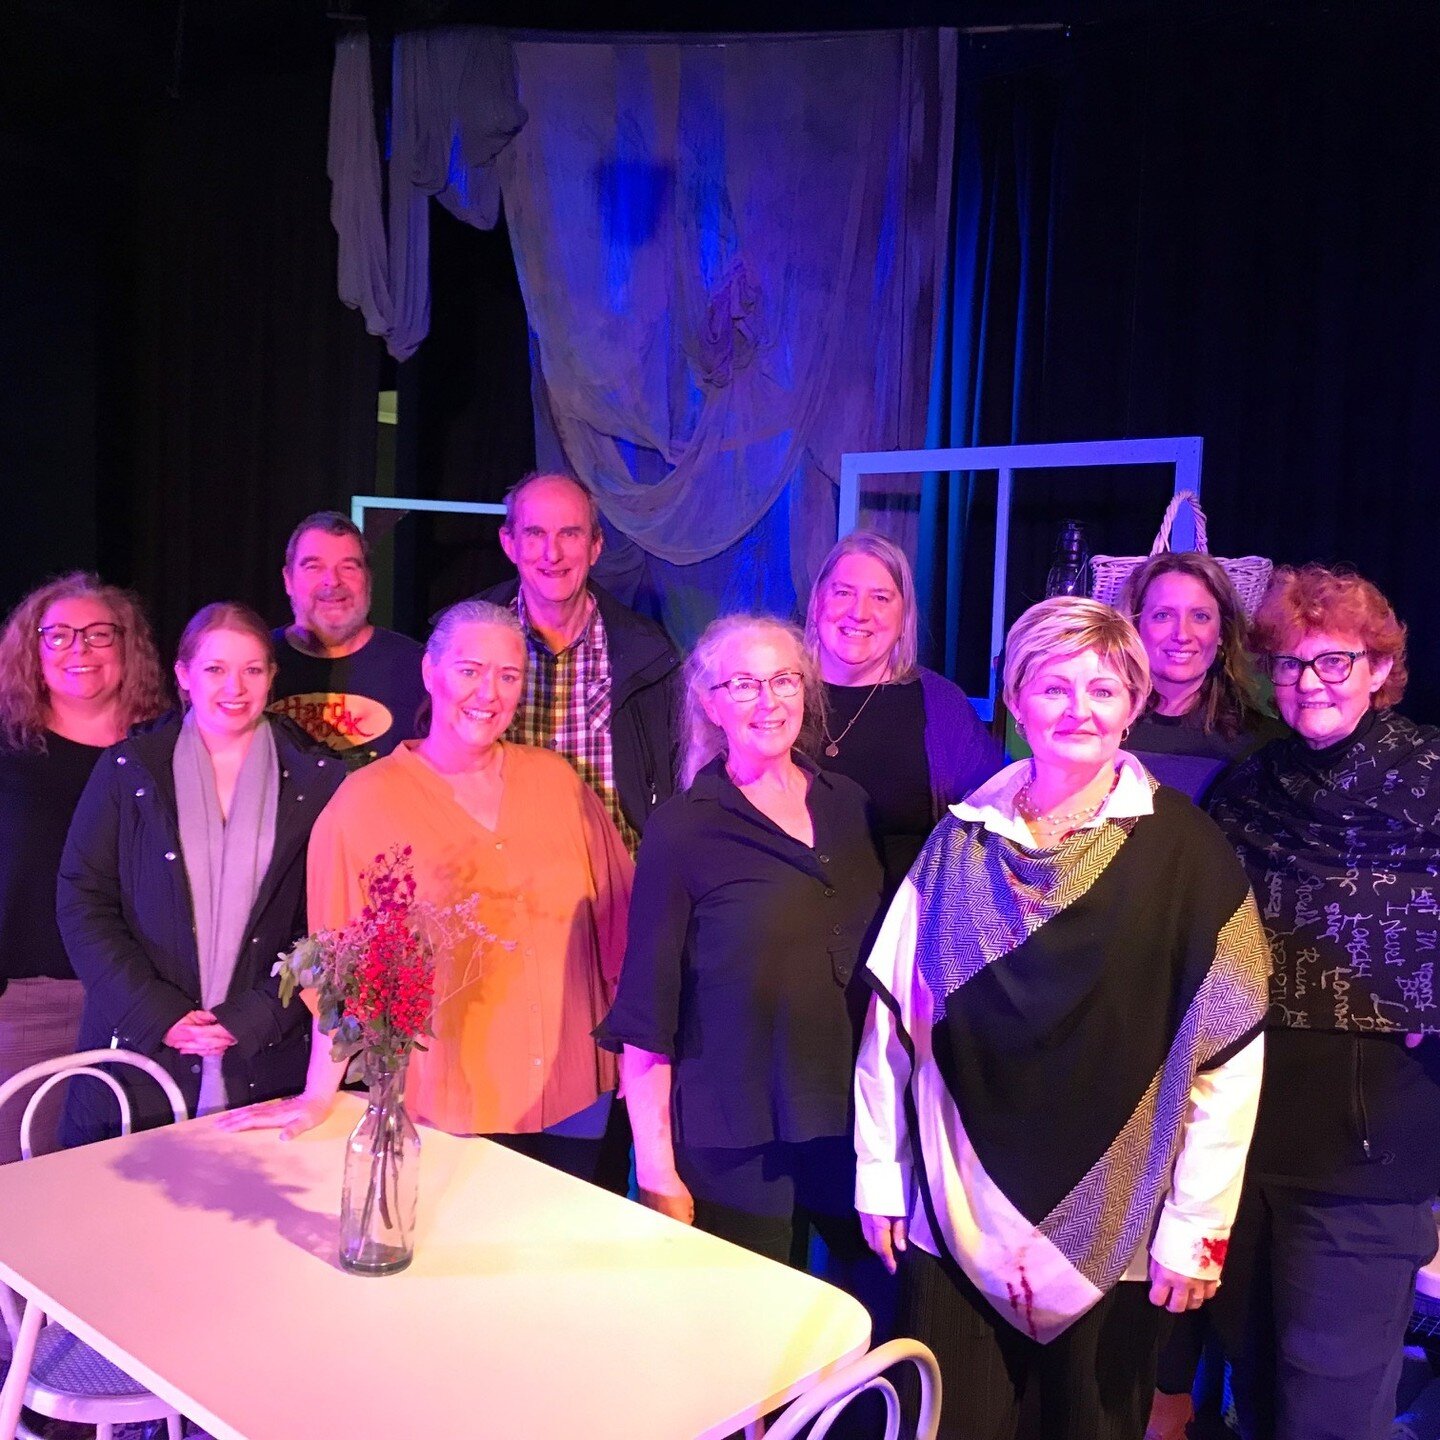 What a team!

Gee we're proud of this group, and their efforts with a wonderful, thought provoking show.

Come see them at Wesley of Warragul or Gemco this weekend!